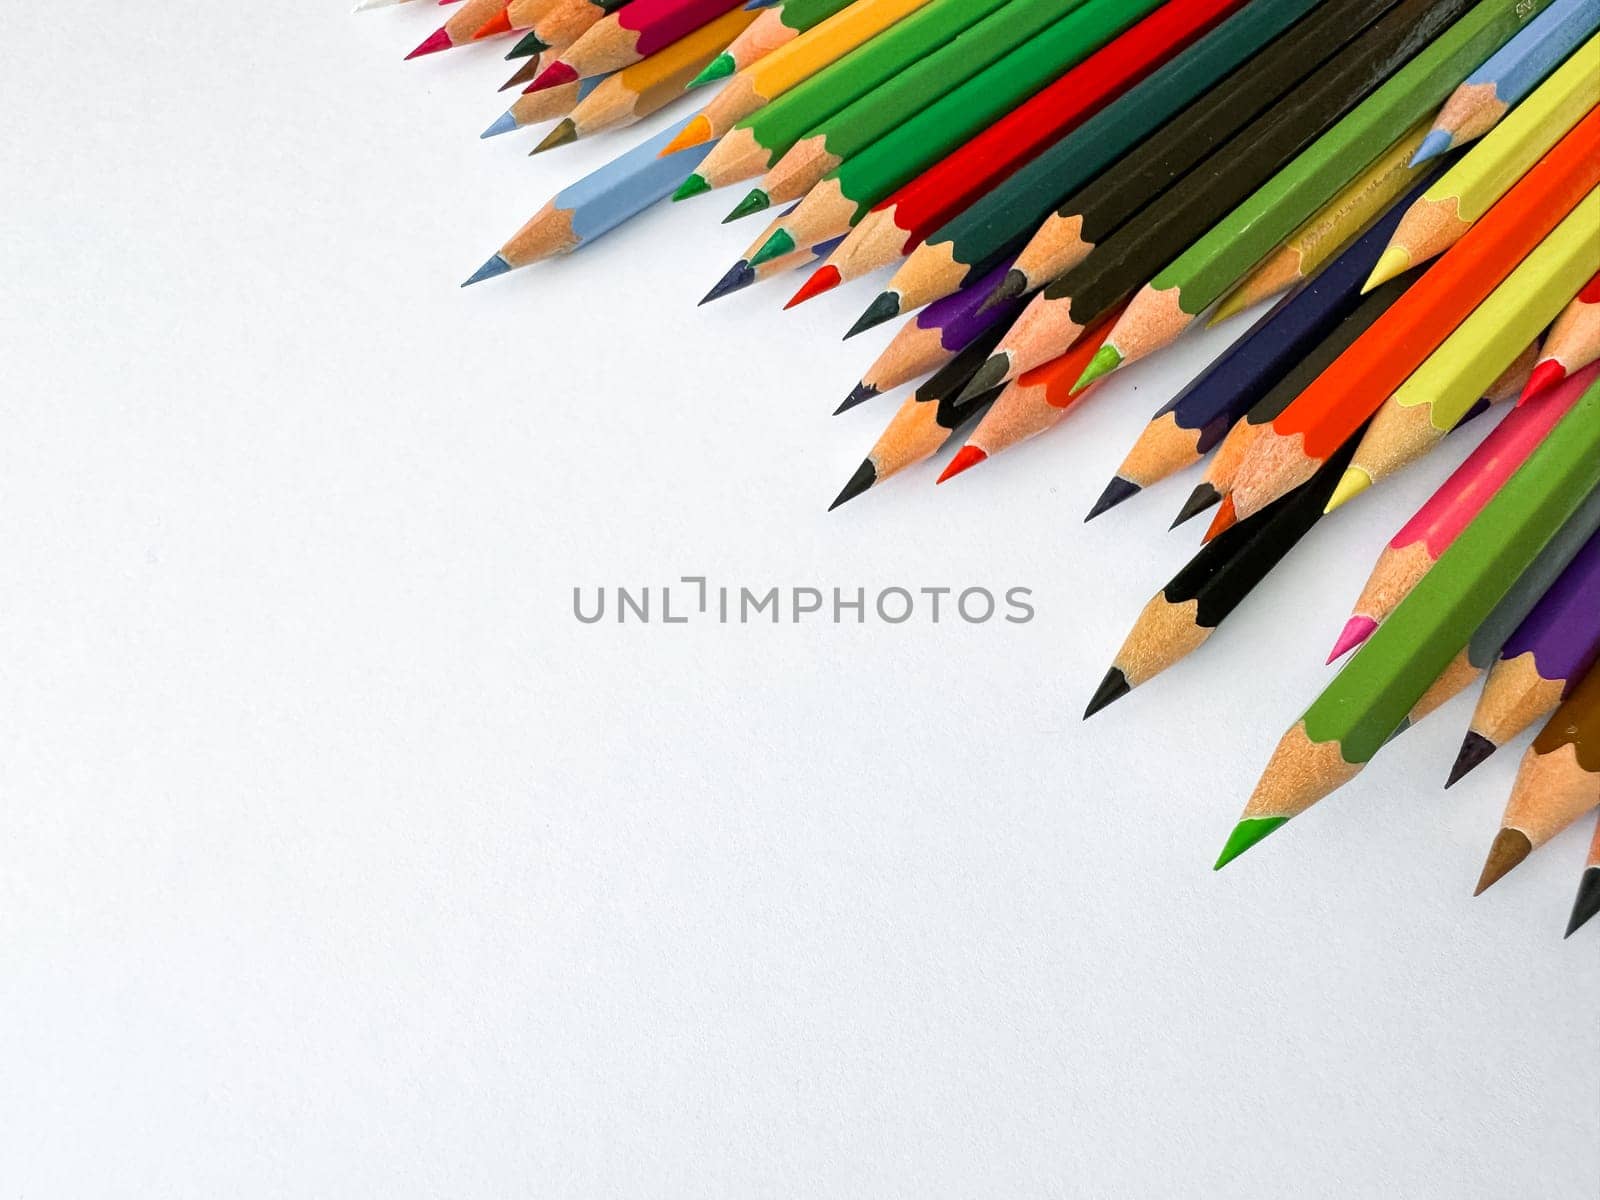 Diagonal arrangement of sharp multi colored pencils on white background with empty space for text. Artistic concept for stationery, education, design advertising banner for school products. by Lunnica